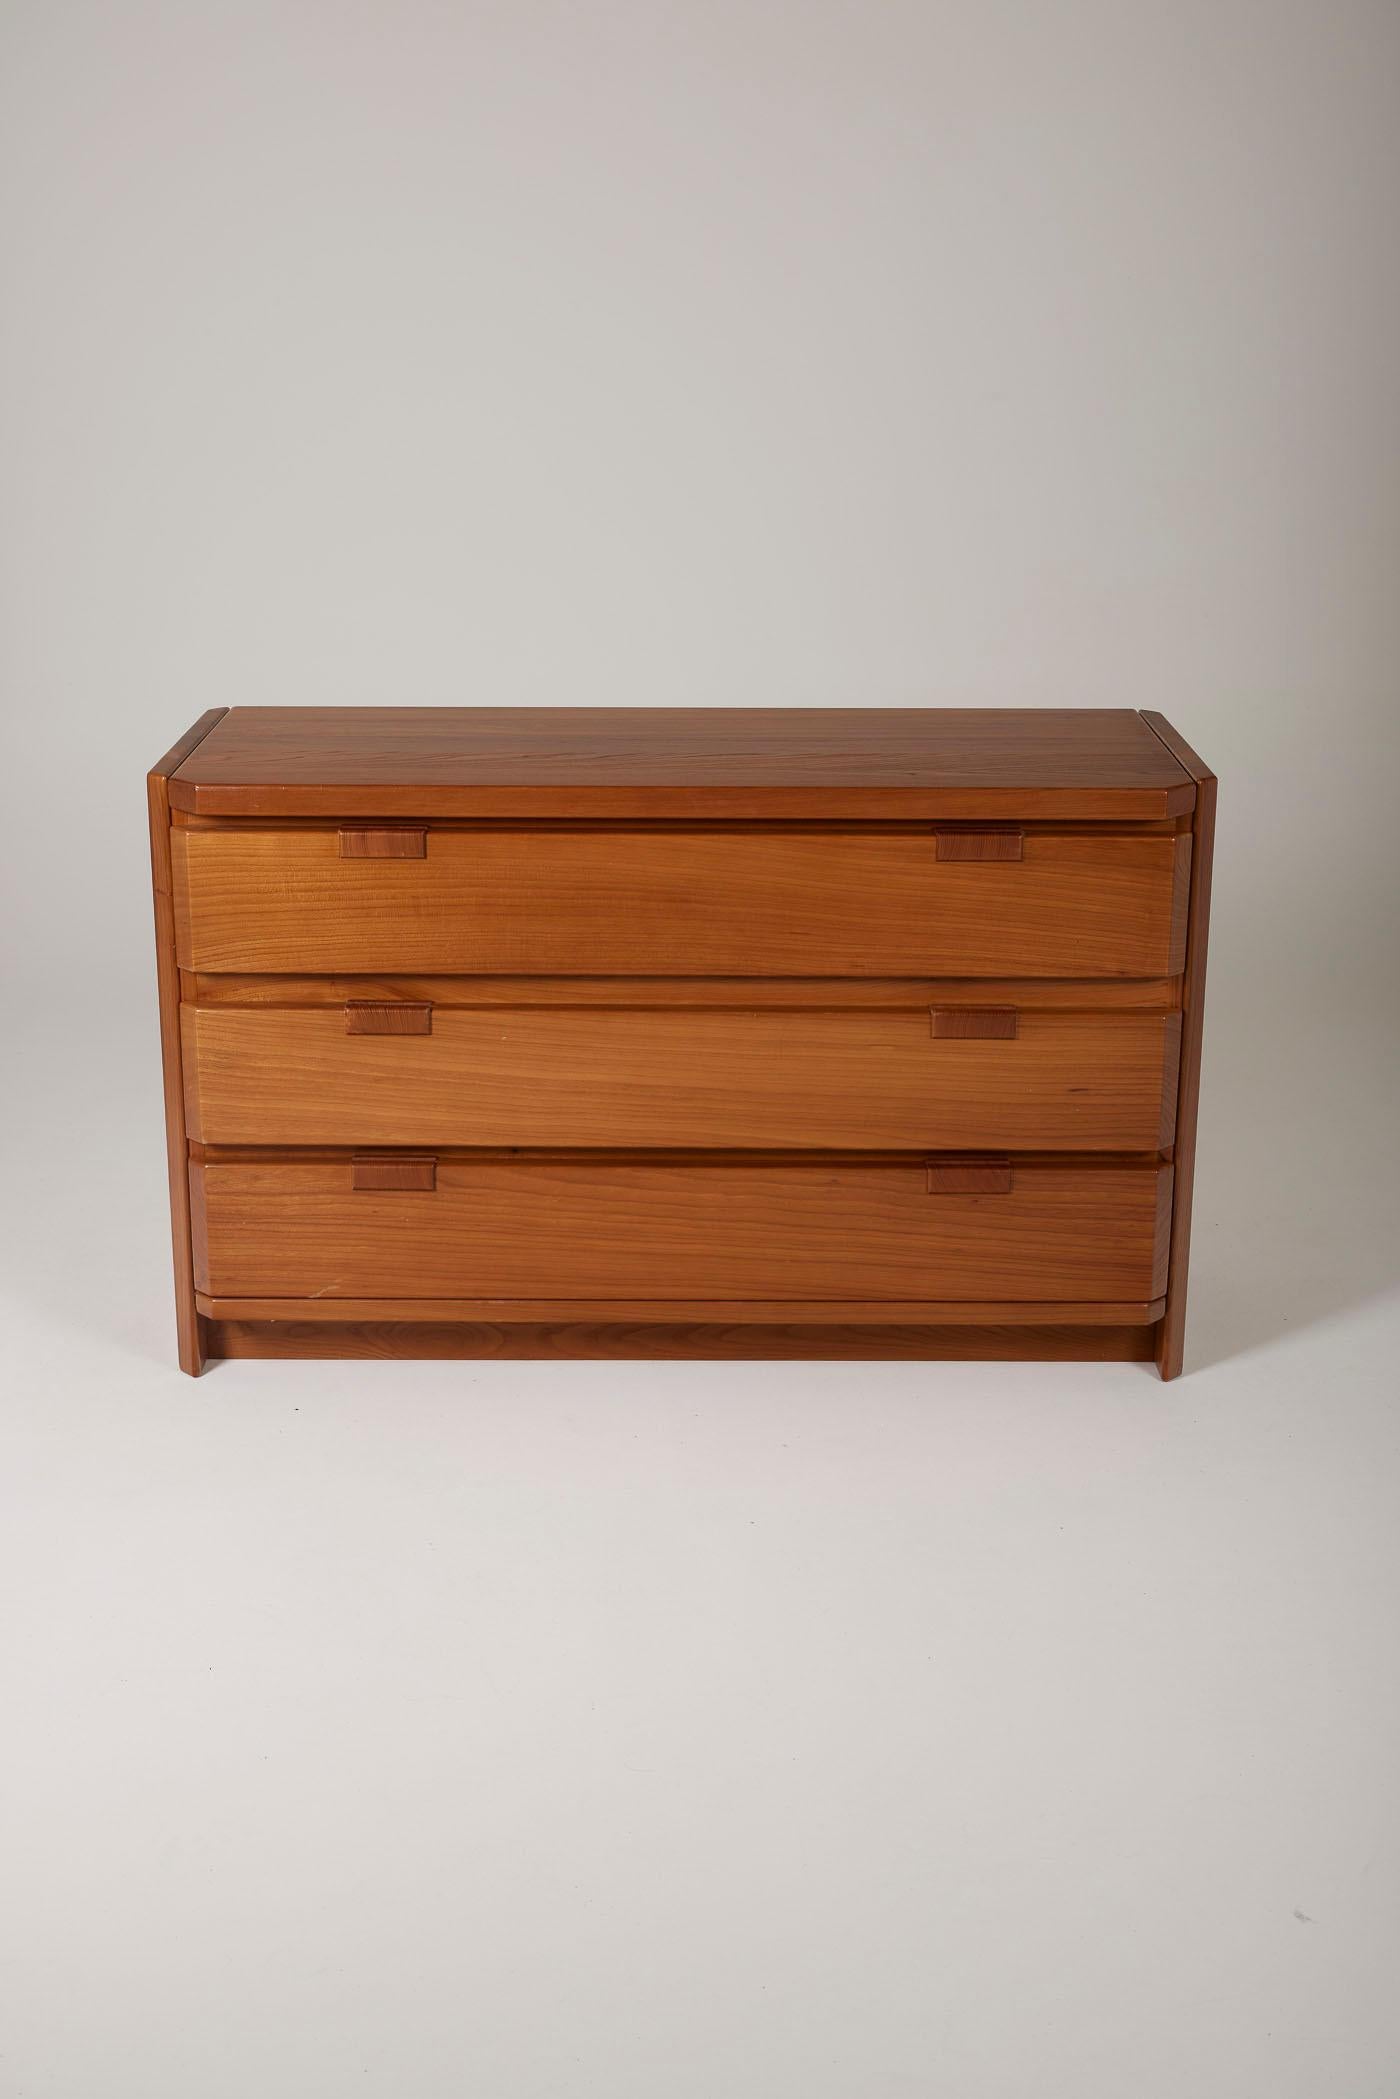 Solid elm dresser by designer Luigi Gorgoni (born 1937), produced by Roche Bobois in the 1980s. In very good condition.
LP2025